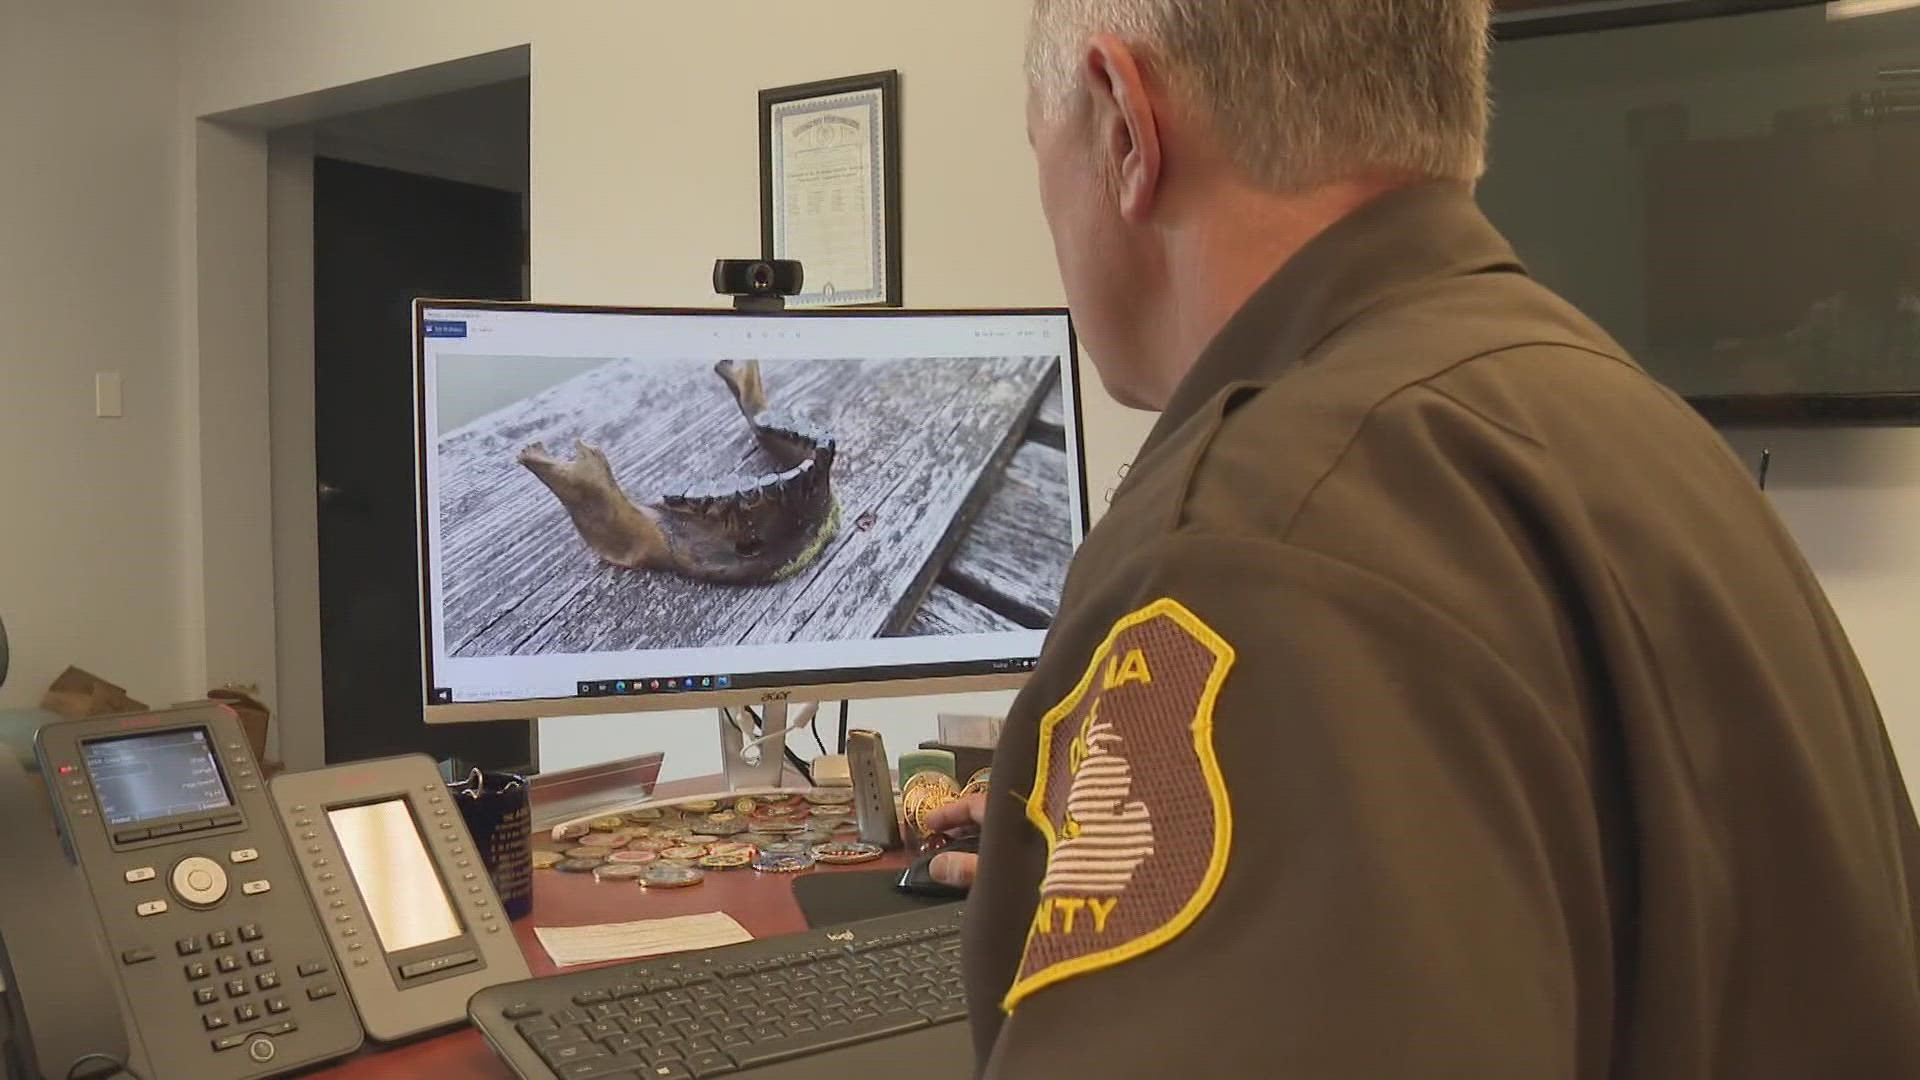 The Oceana County Sheriff's Office believes the jawbone is old enough to be a Native American artifact, and the remains will be sent to various labs for analysis.